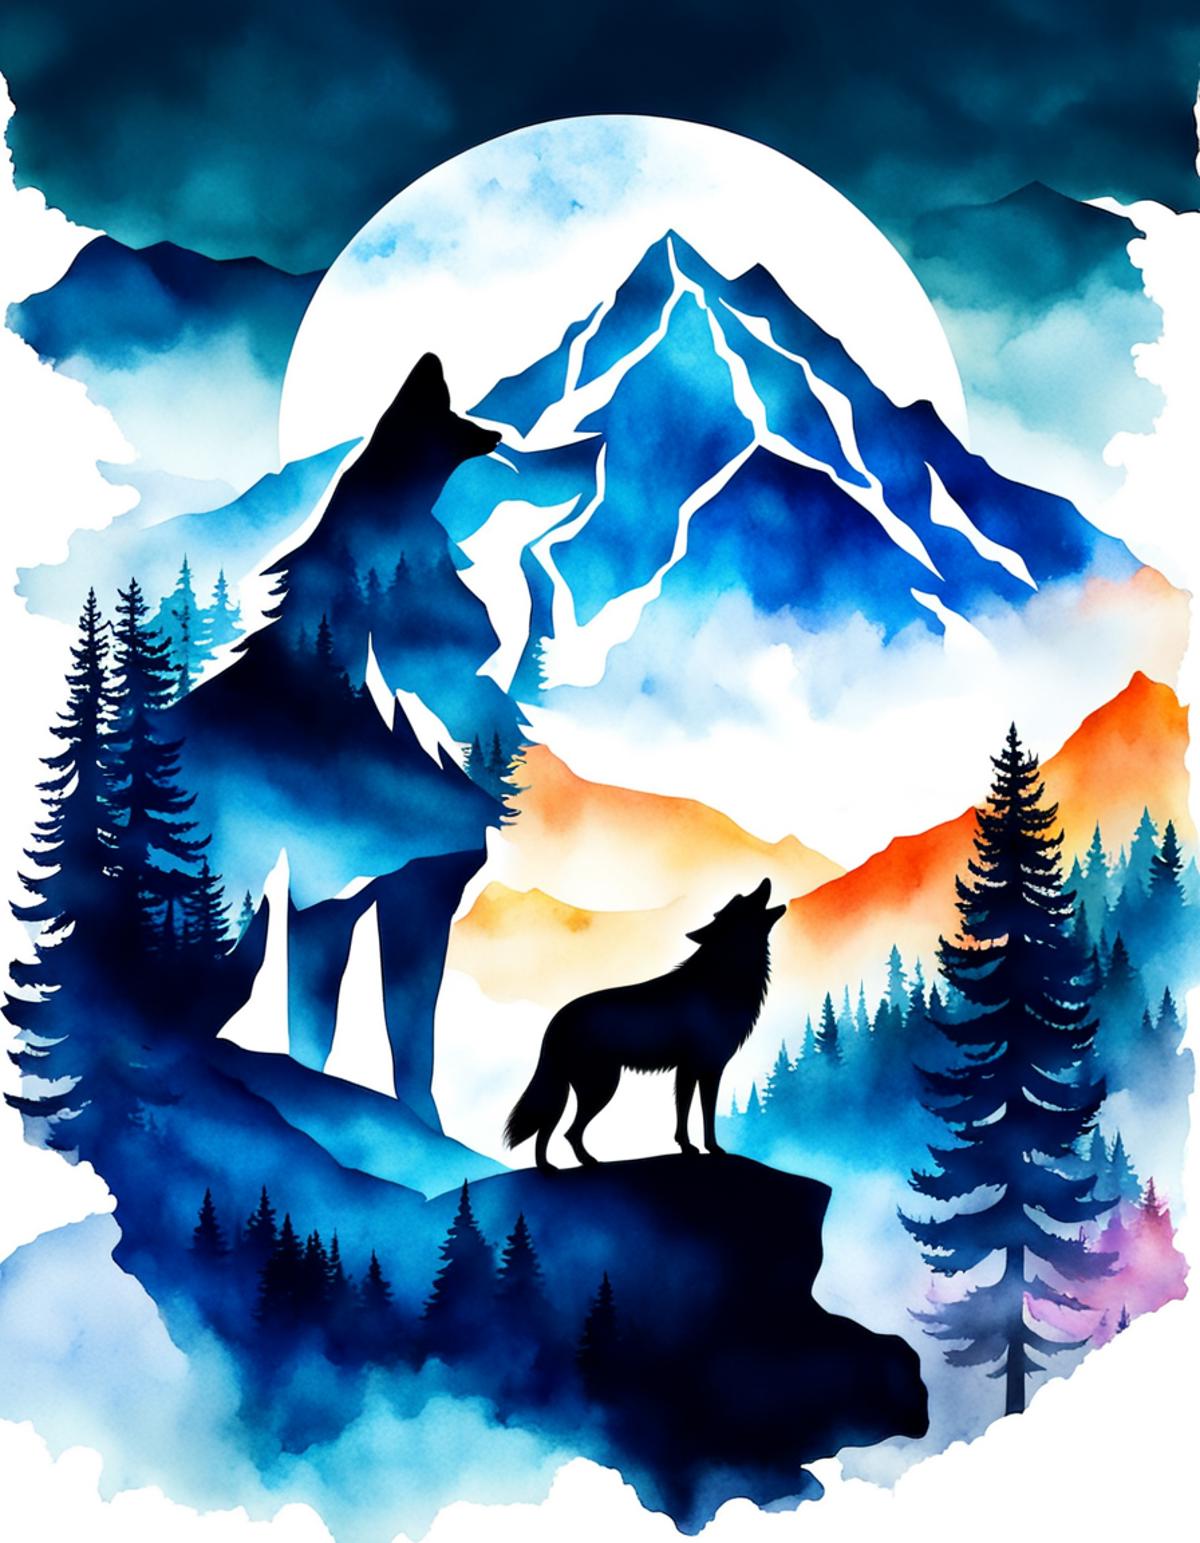 A Wolf and a Moonlit Mountain Scene